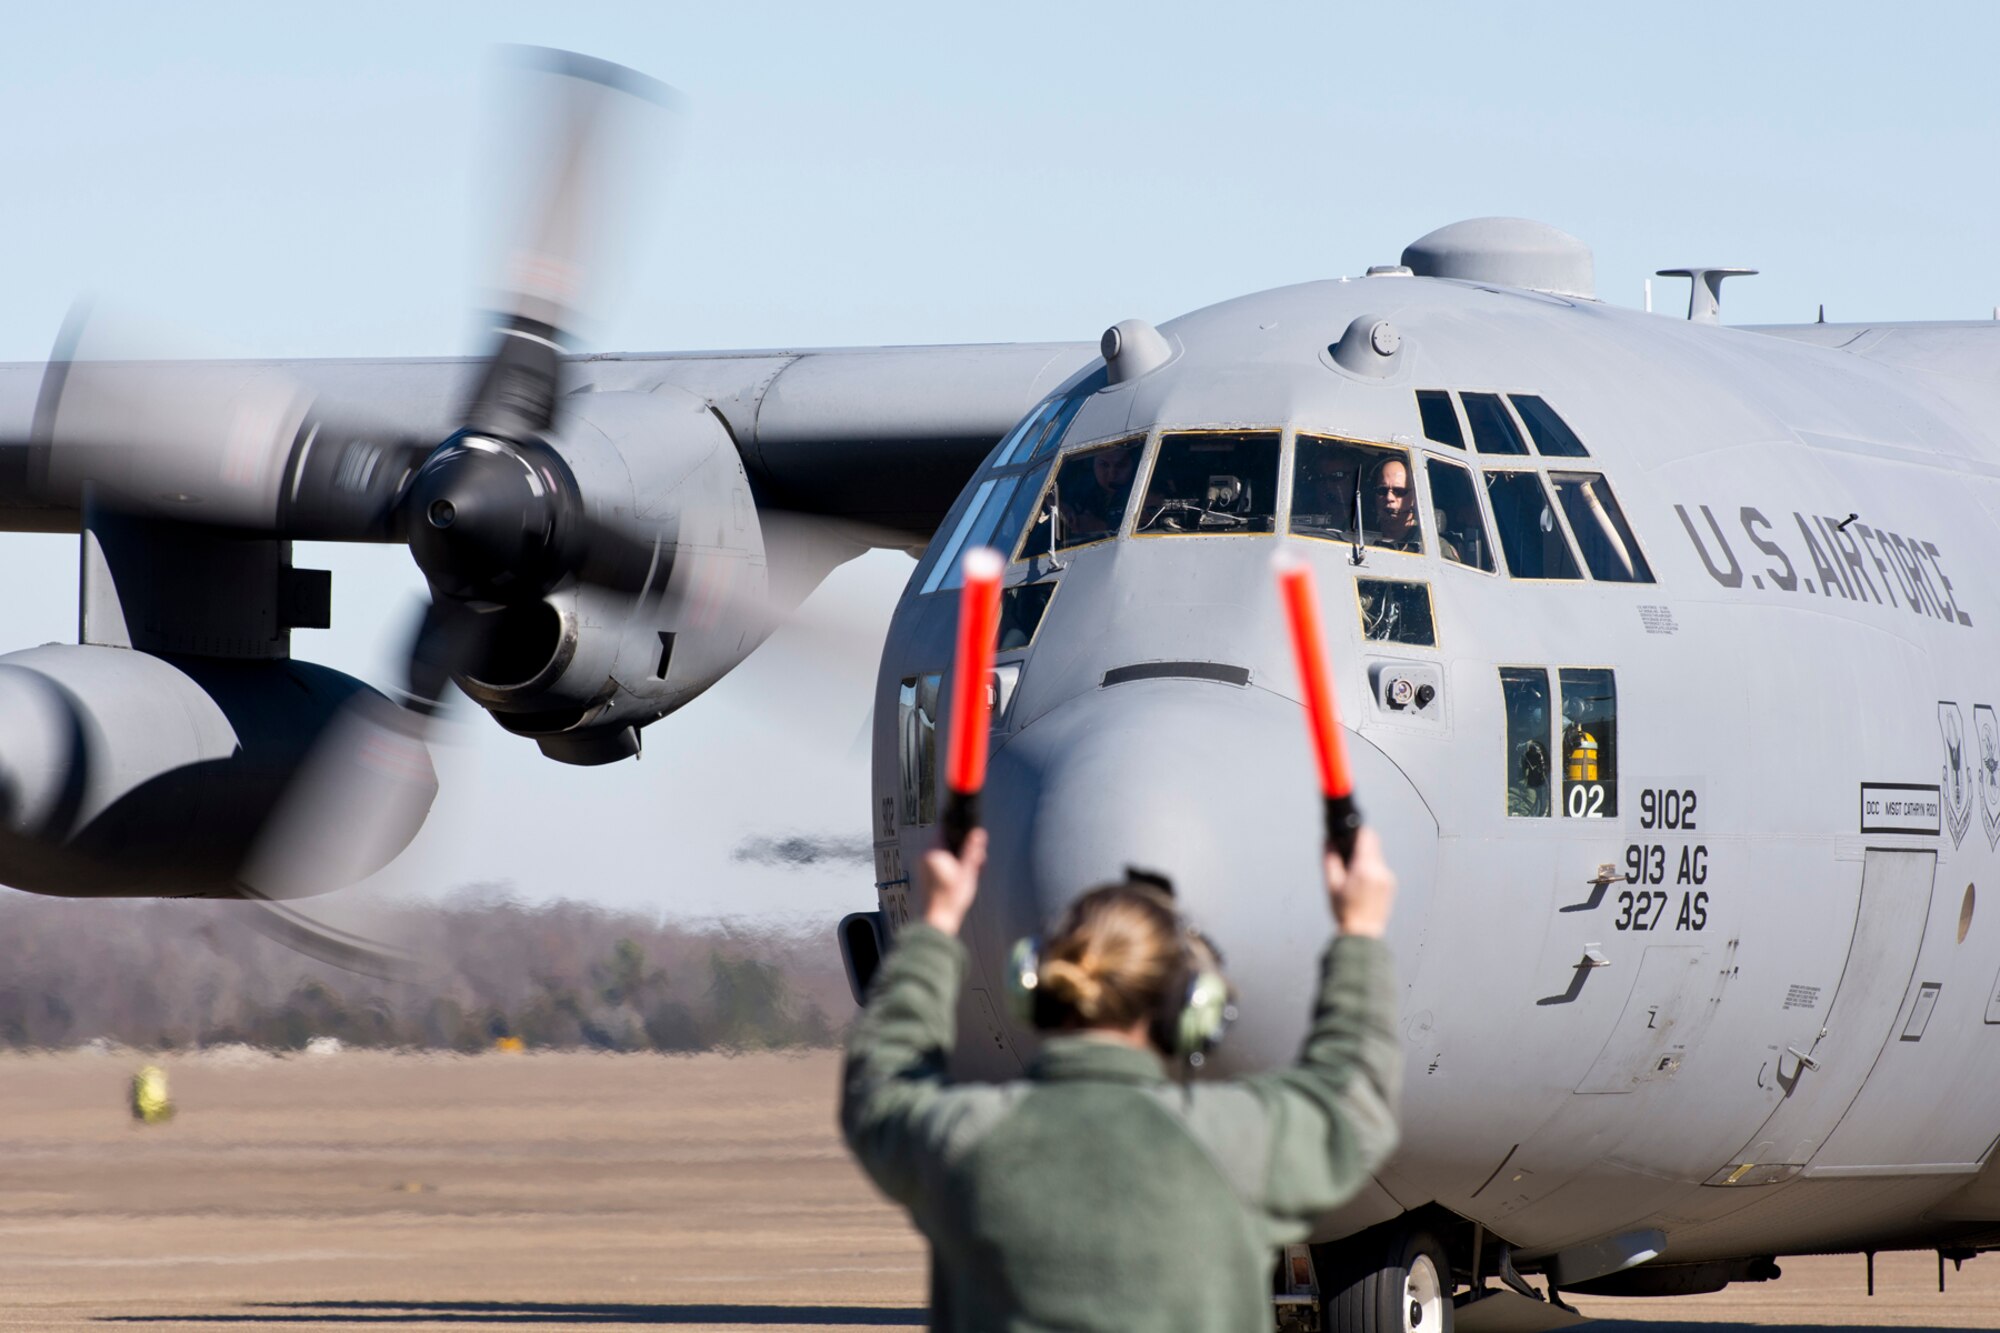 U.S. Air Force Reserve Tech. Sgt. Stephanie Martin, engine mechanic, 913th Maintenance Squadron, marshals a C-130H Hercules after its final training mission at Little Rock Air Force Base, Ark., Jan. 28, 2016. The aircraft is one of the last two H models that will soon be transferred to a new locations as part of the group’s conversion from the “H” model to the “J” model. (U.S. Air Force photo by Master Sgt. Jeff Walston/Released)